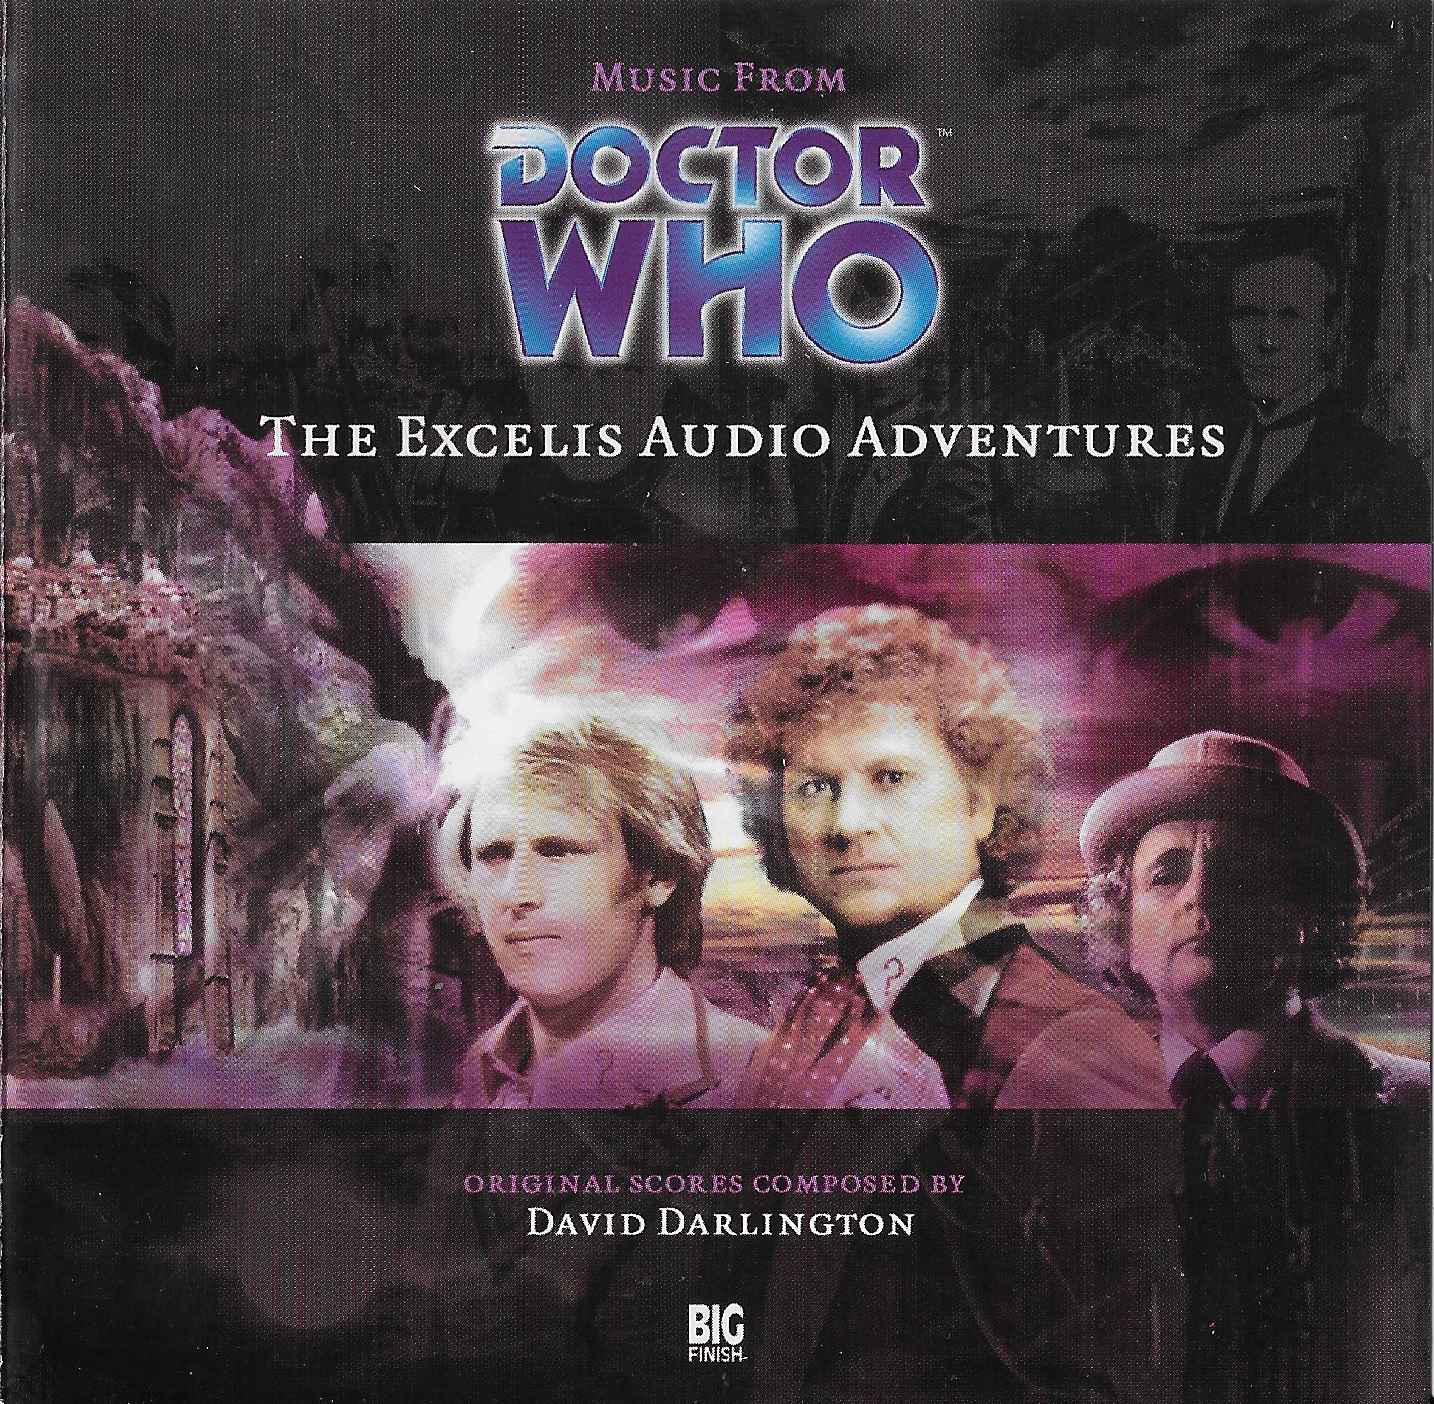 Picture of BFPCDMUSIC 7 Doctor Who - Music from the Excelis audio adventures by artist David Darlington from the BBC records and Tapes library